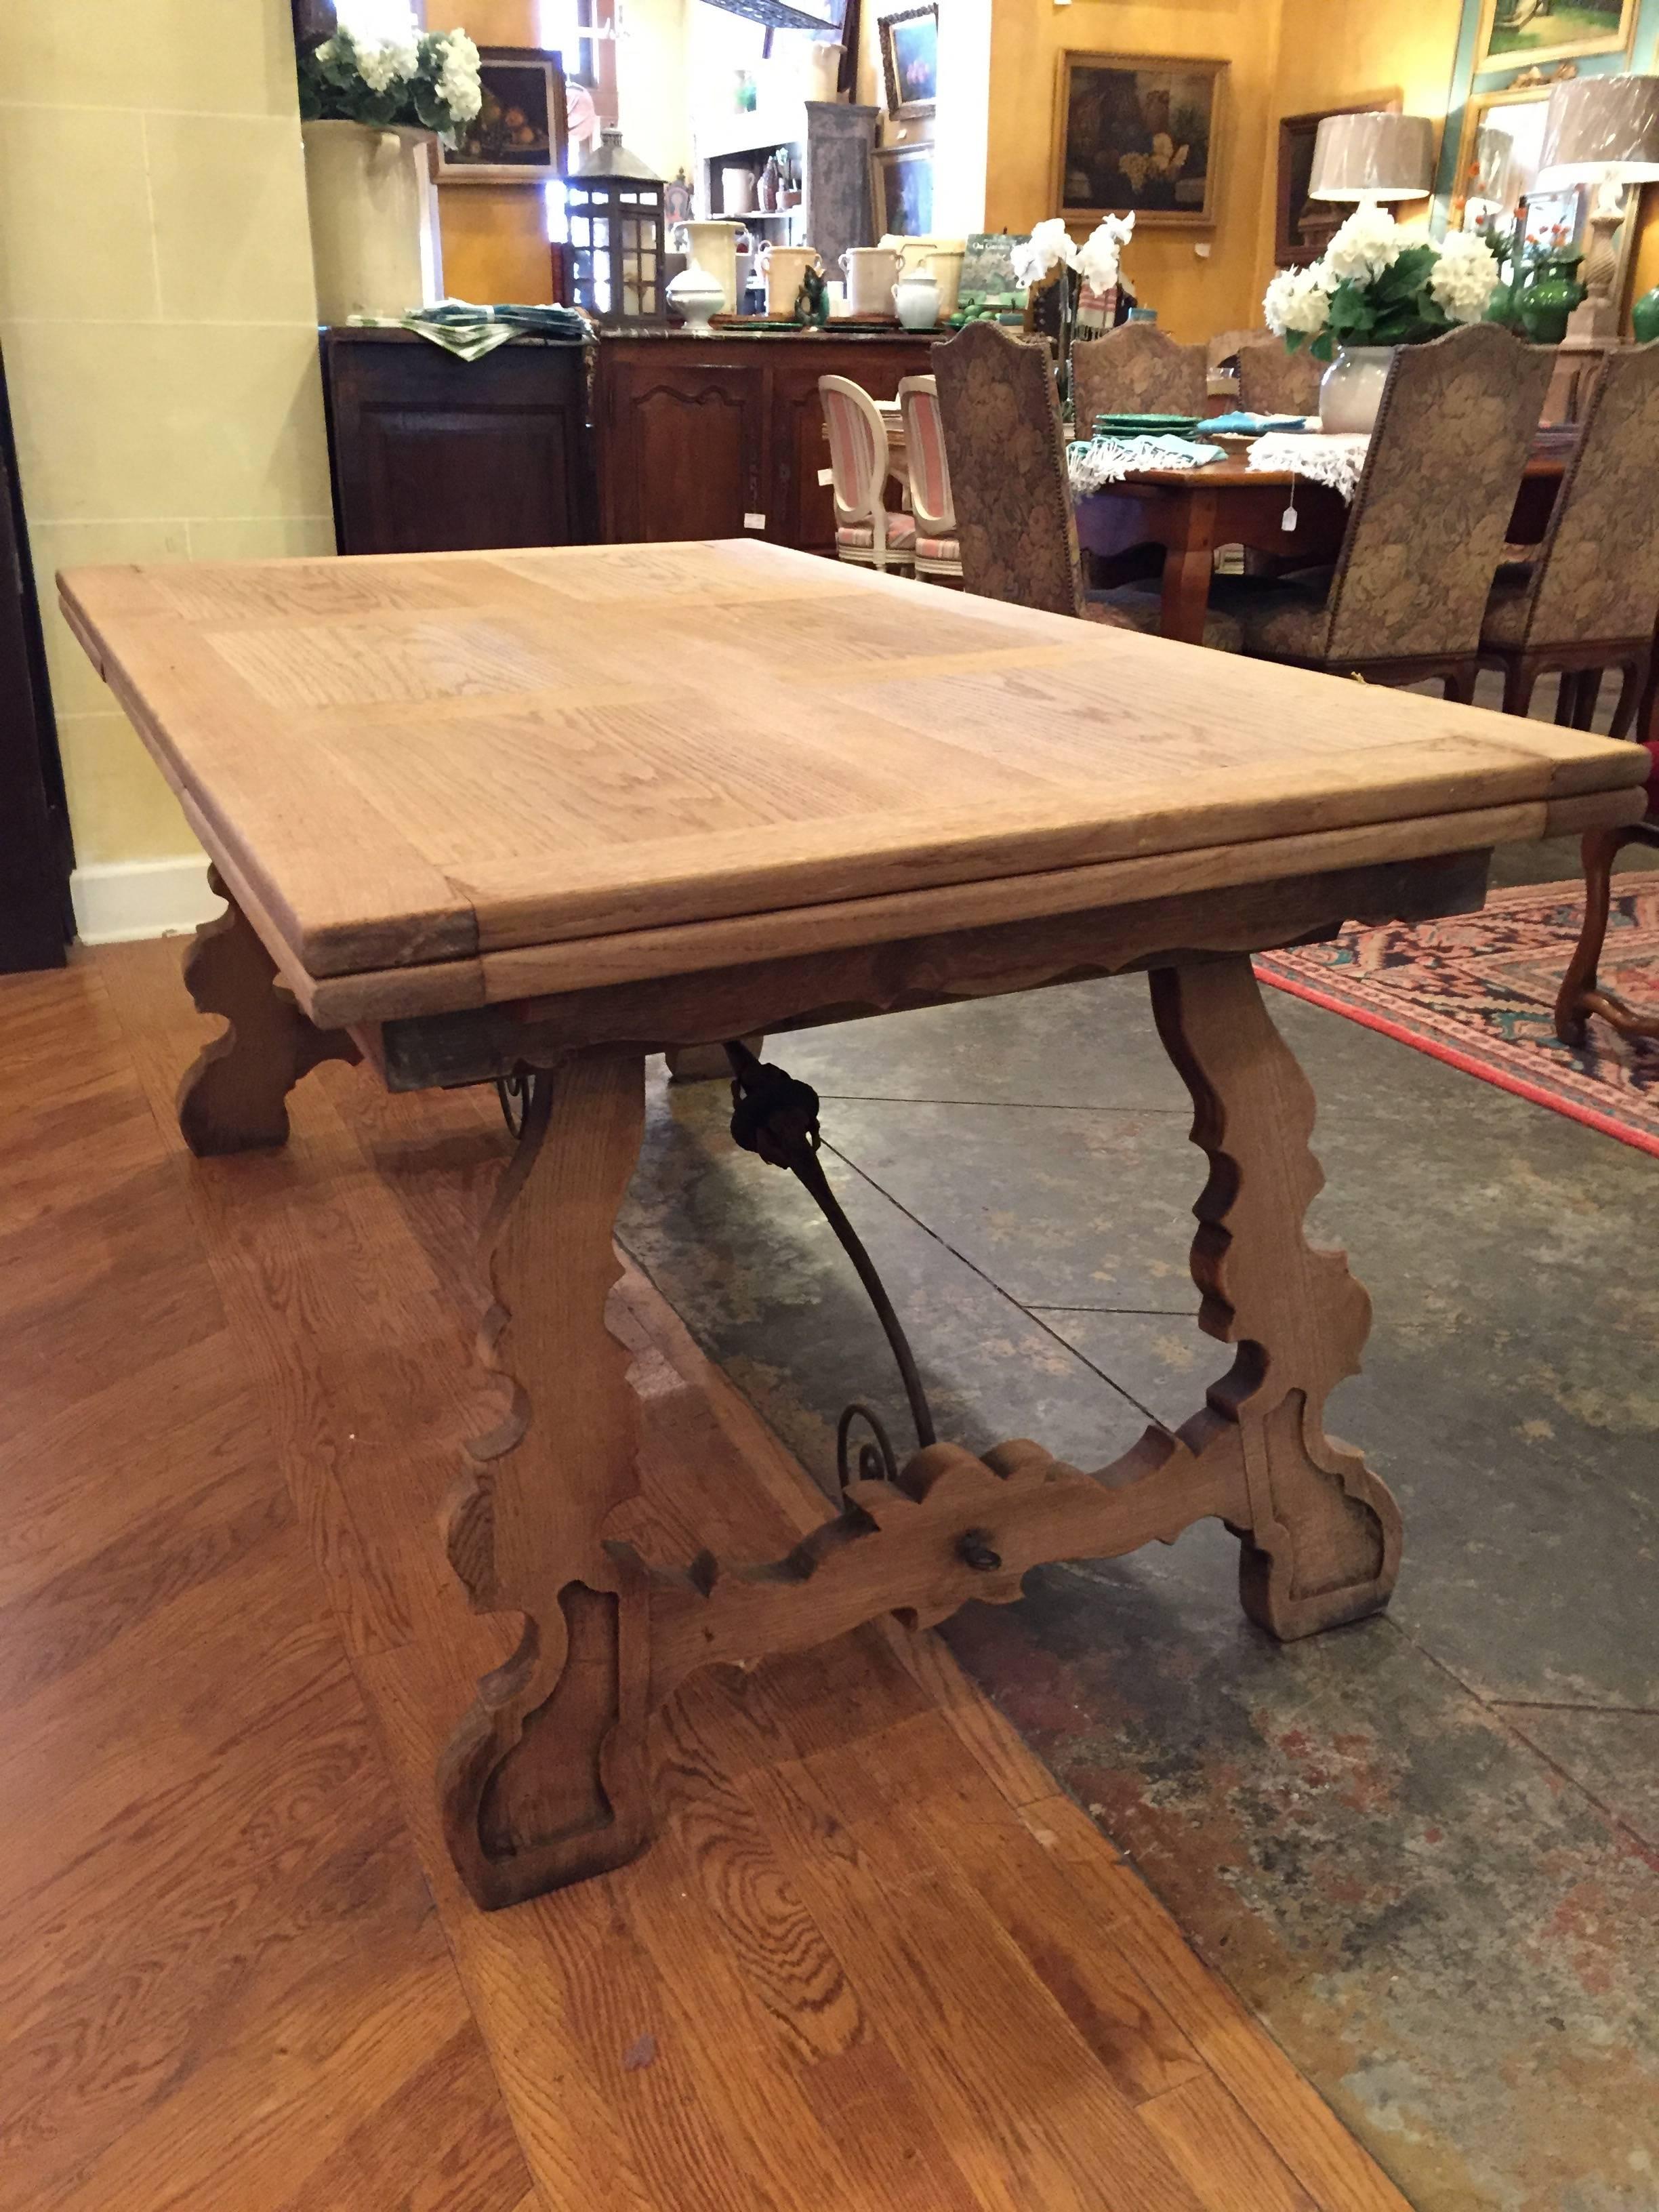 Magnificent 19th century Spanish draw-leaf farm table constructed from bleached or washed oak and hand-forged iron stretchers. Would work great as a dining table, but could also make a great console or writing table as well.

Length 63